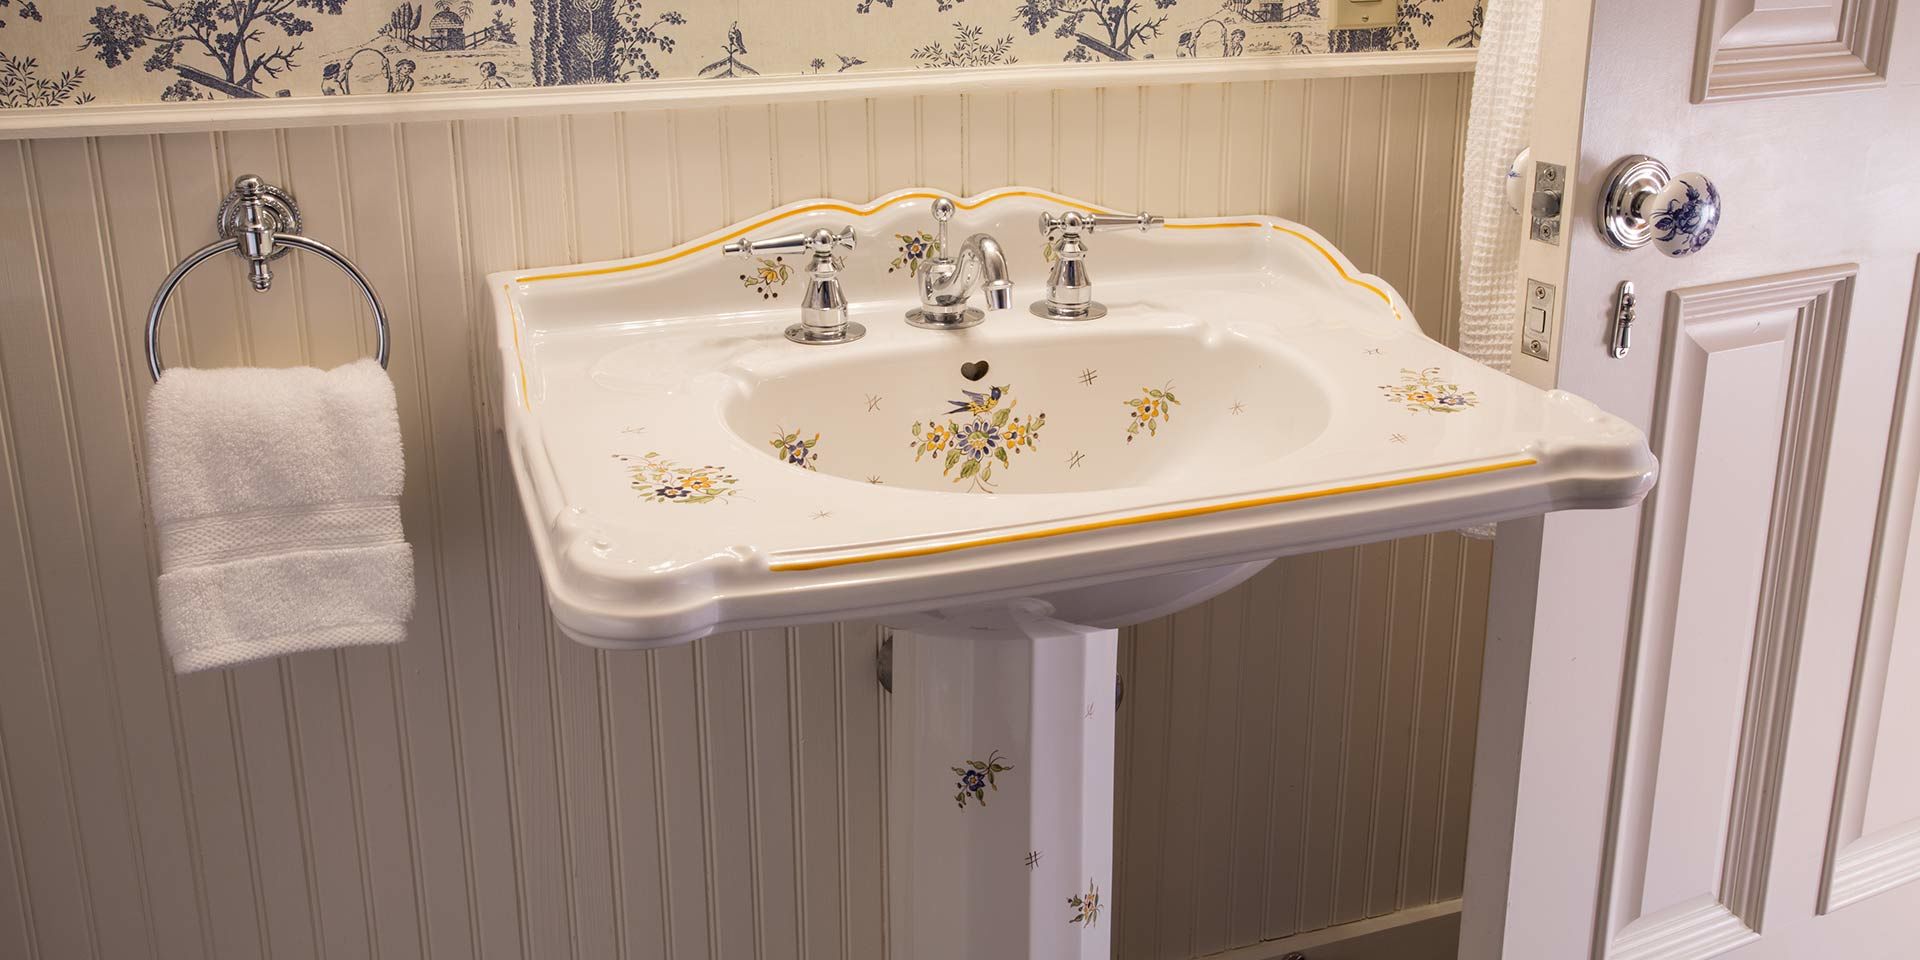 The sink inside the bathroom of the French Provincial Guest Room